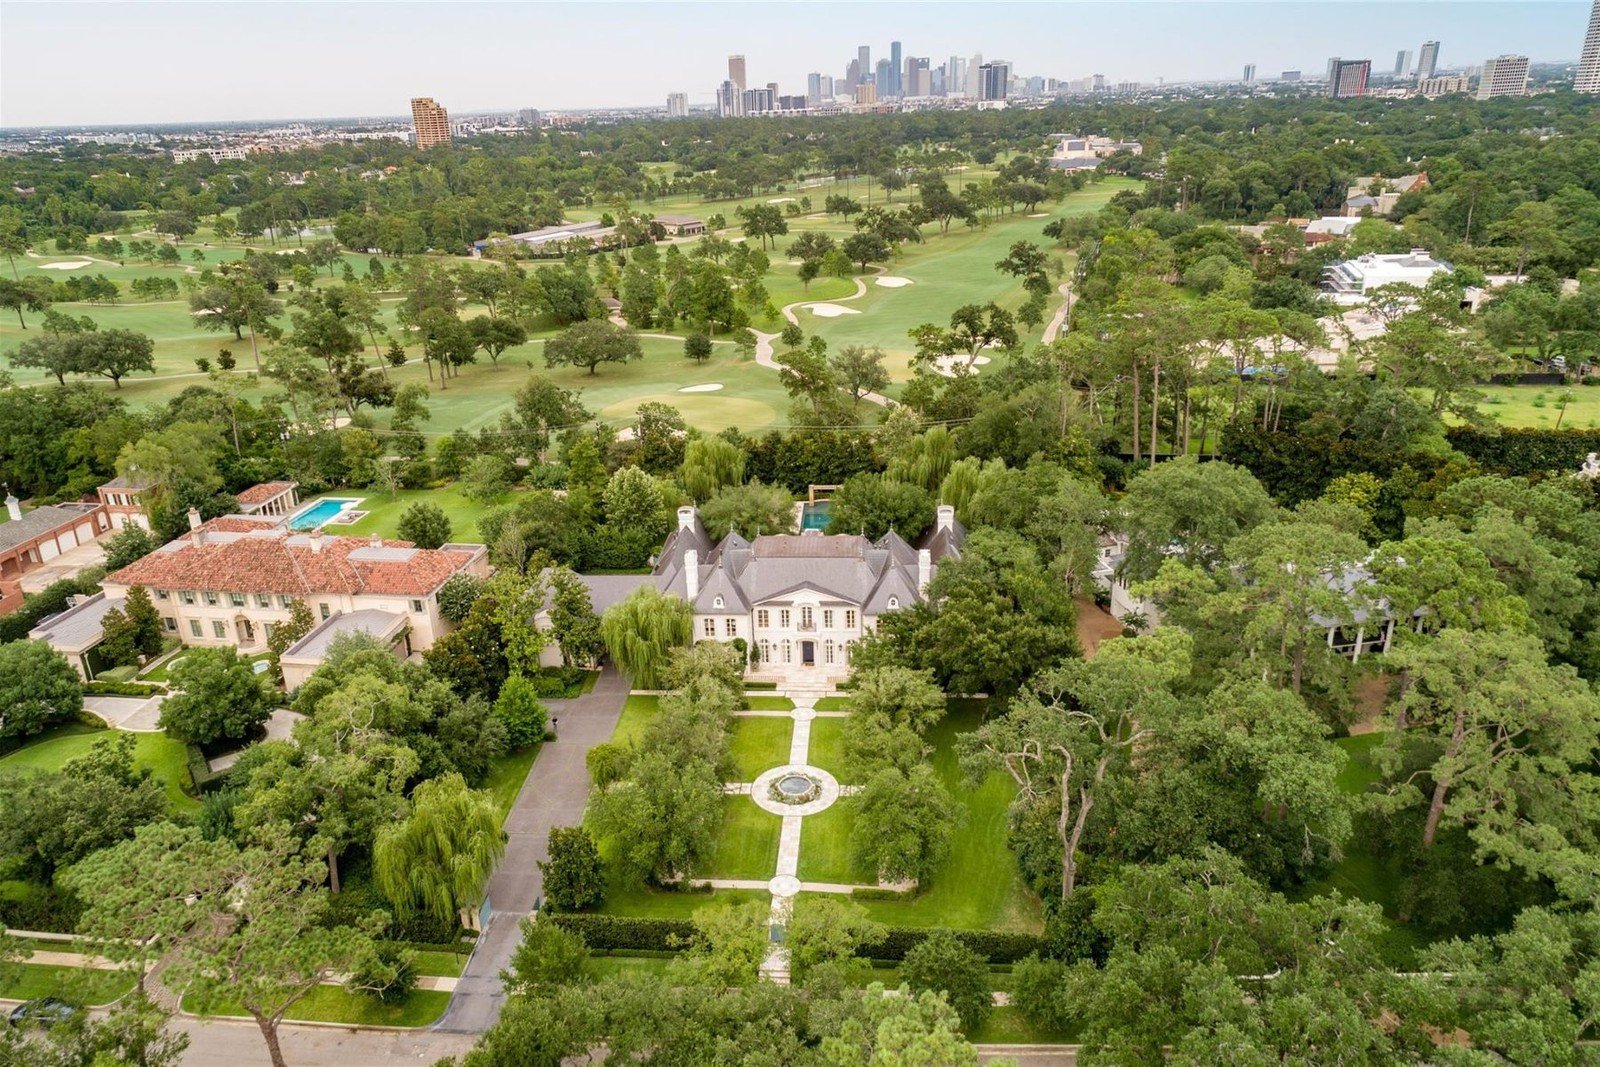 Francis York French Chateau-Style Mansion in Houston, Texas m00003.jpeg